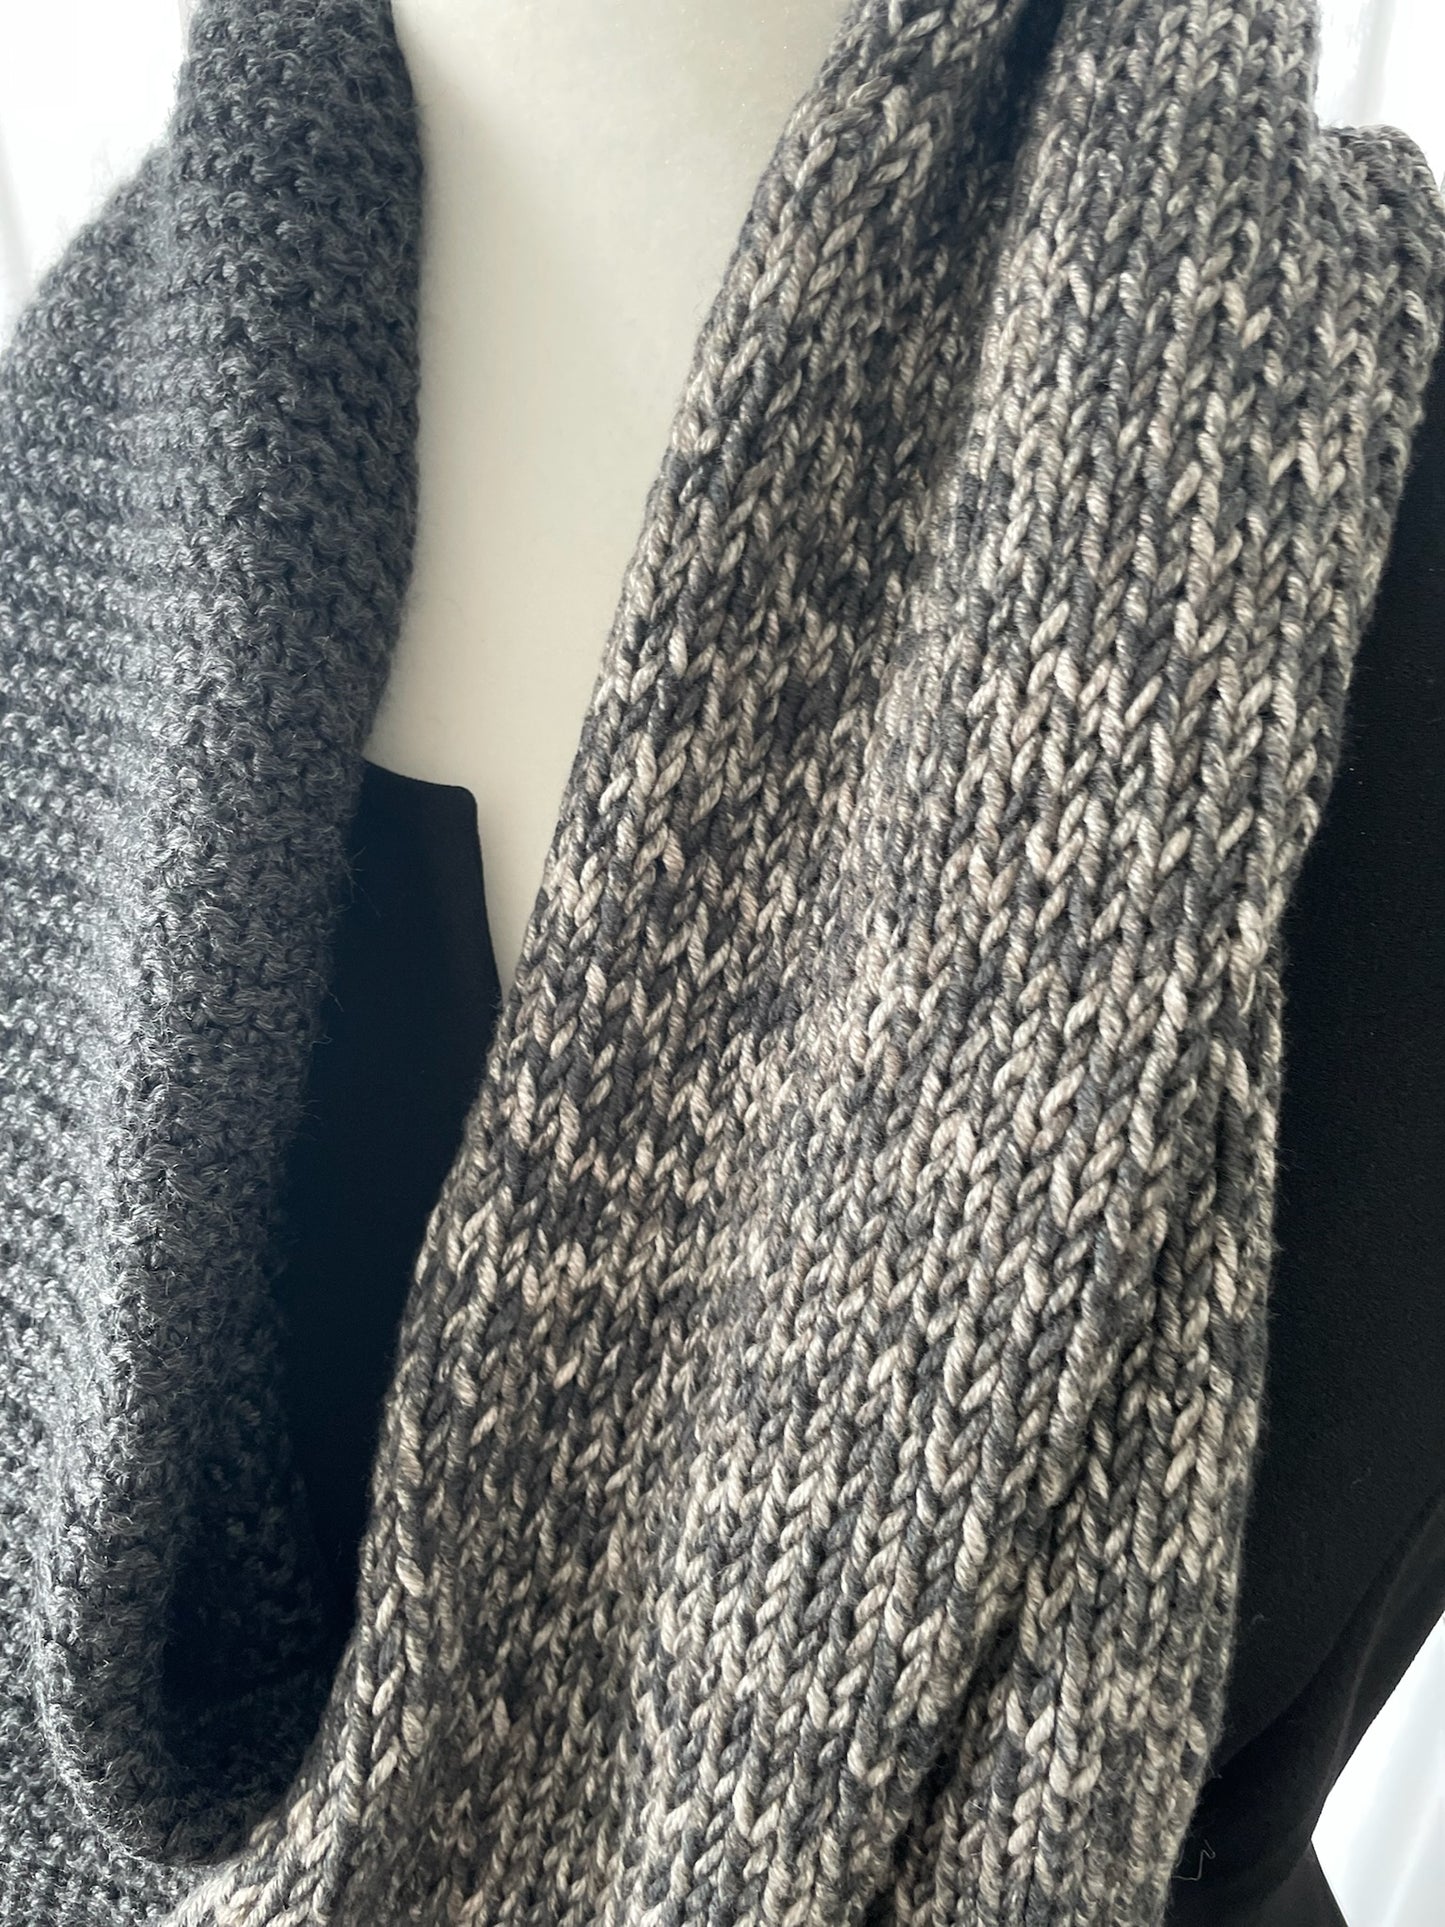 Hand-Knitted Grey & Black Infinity Scarf